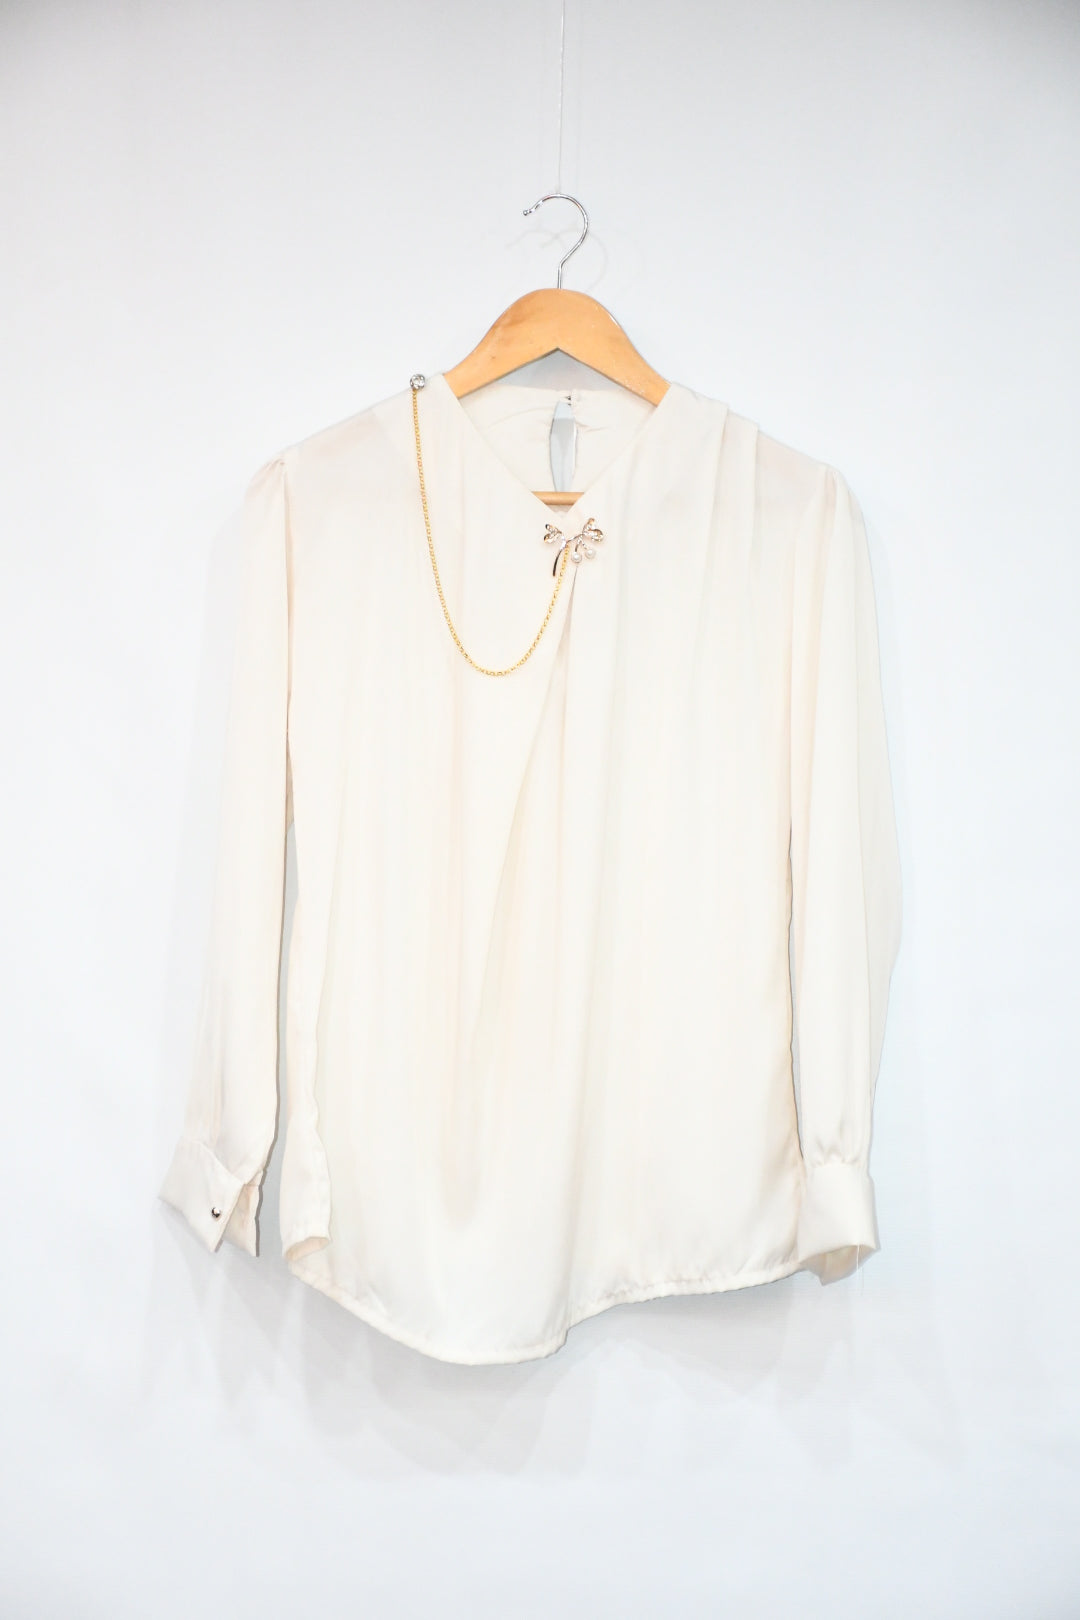 Top Shoulder Chained Style- Porcelain Solid White